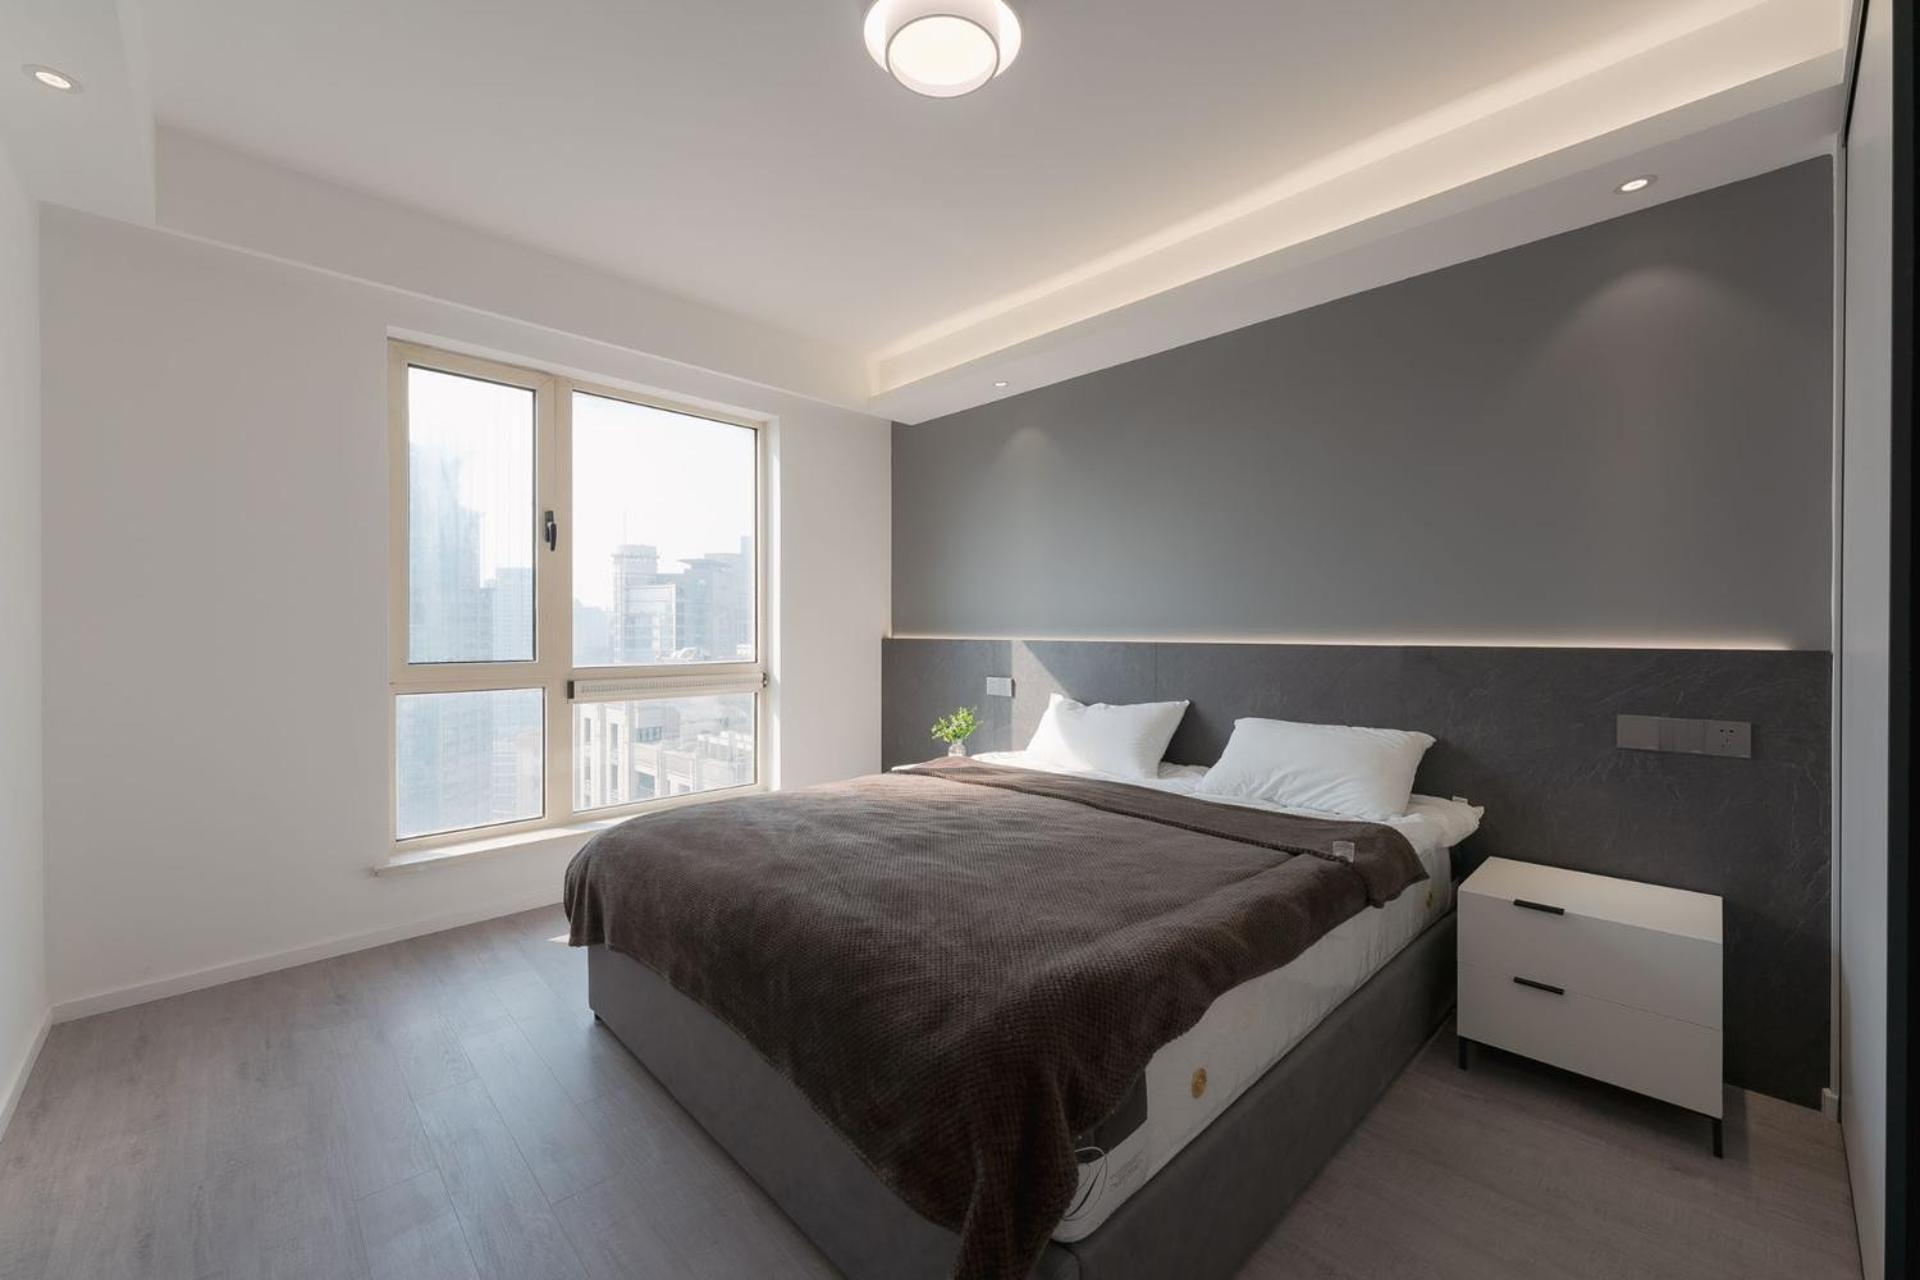 Brand New Apartment The Bund Nanjing Road Xintiandi Cheng Huangmiao Large Flat Warm And Sunny Three Rooms 100M From Metro Station 上海 外观 照片